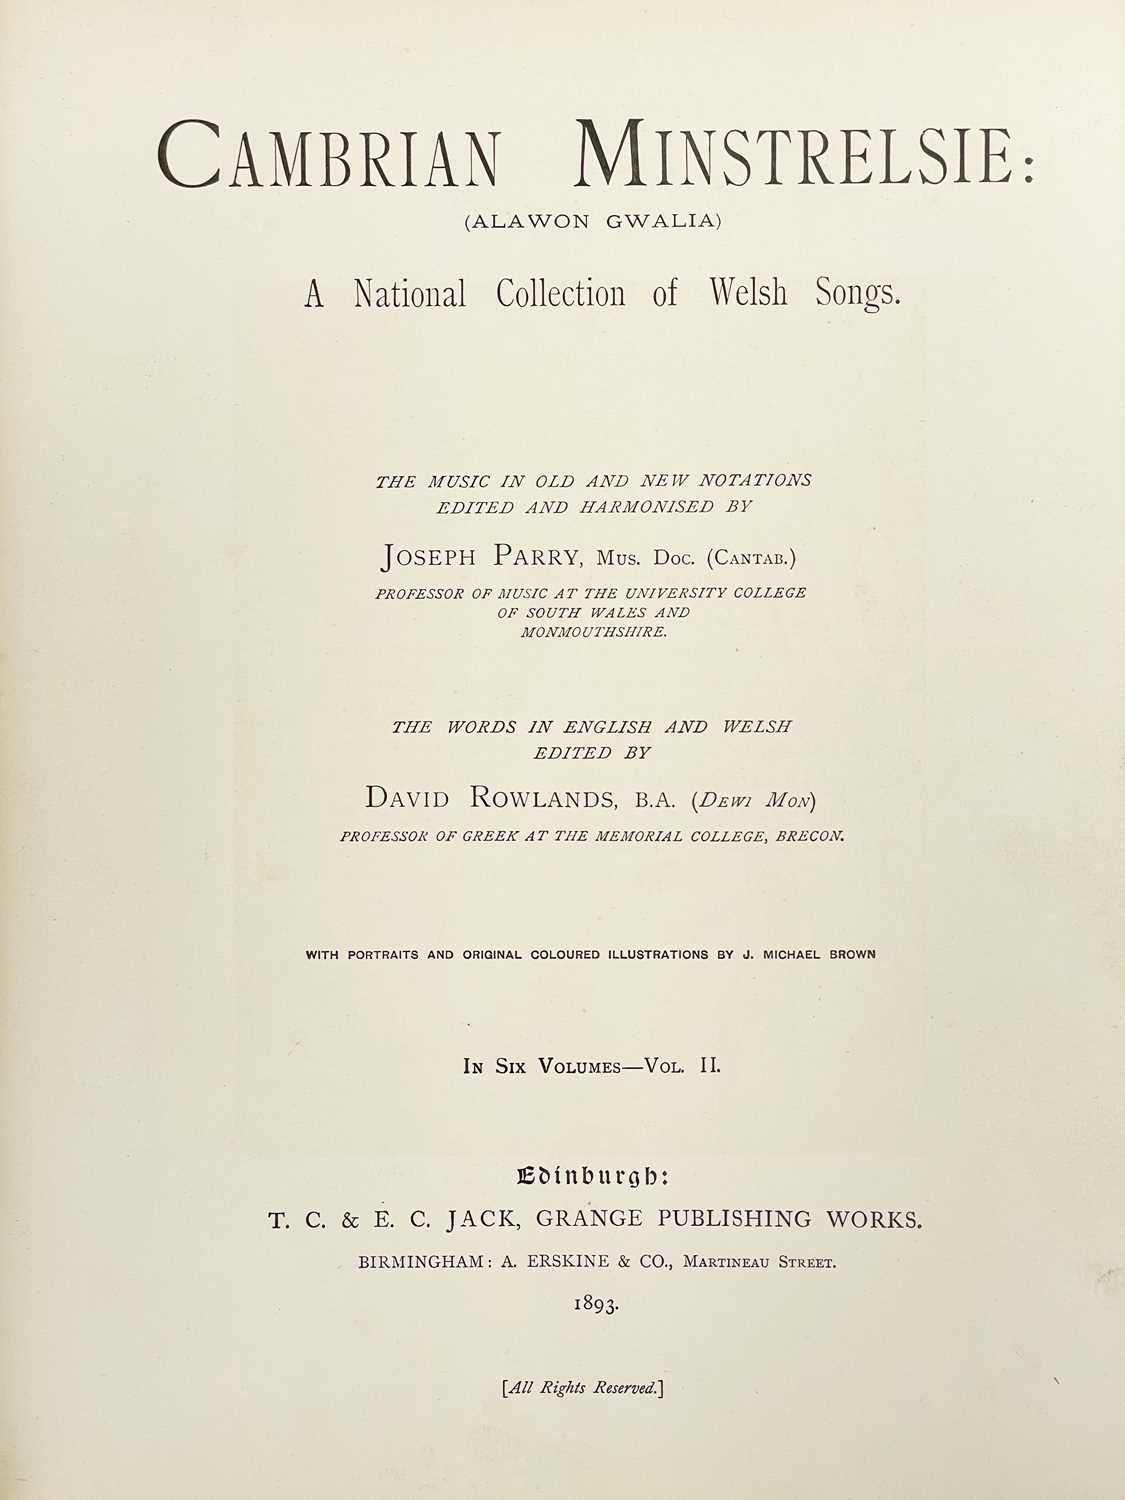 PARRY, Joseph & ROWLANDS, David Cambrian Minstrelsie - A National Collection of Welsh Songs - Image 2 of 7